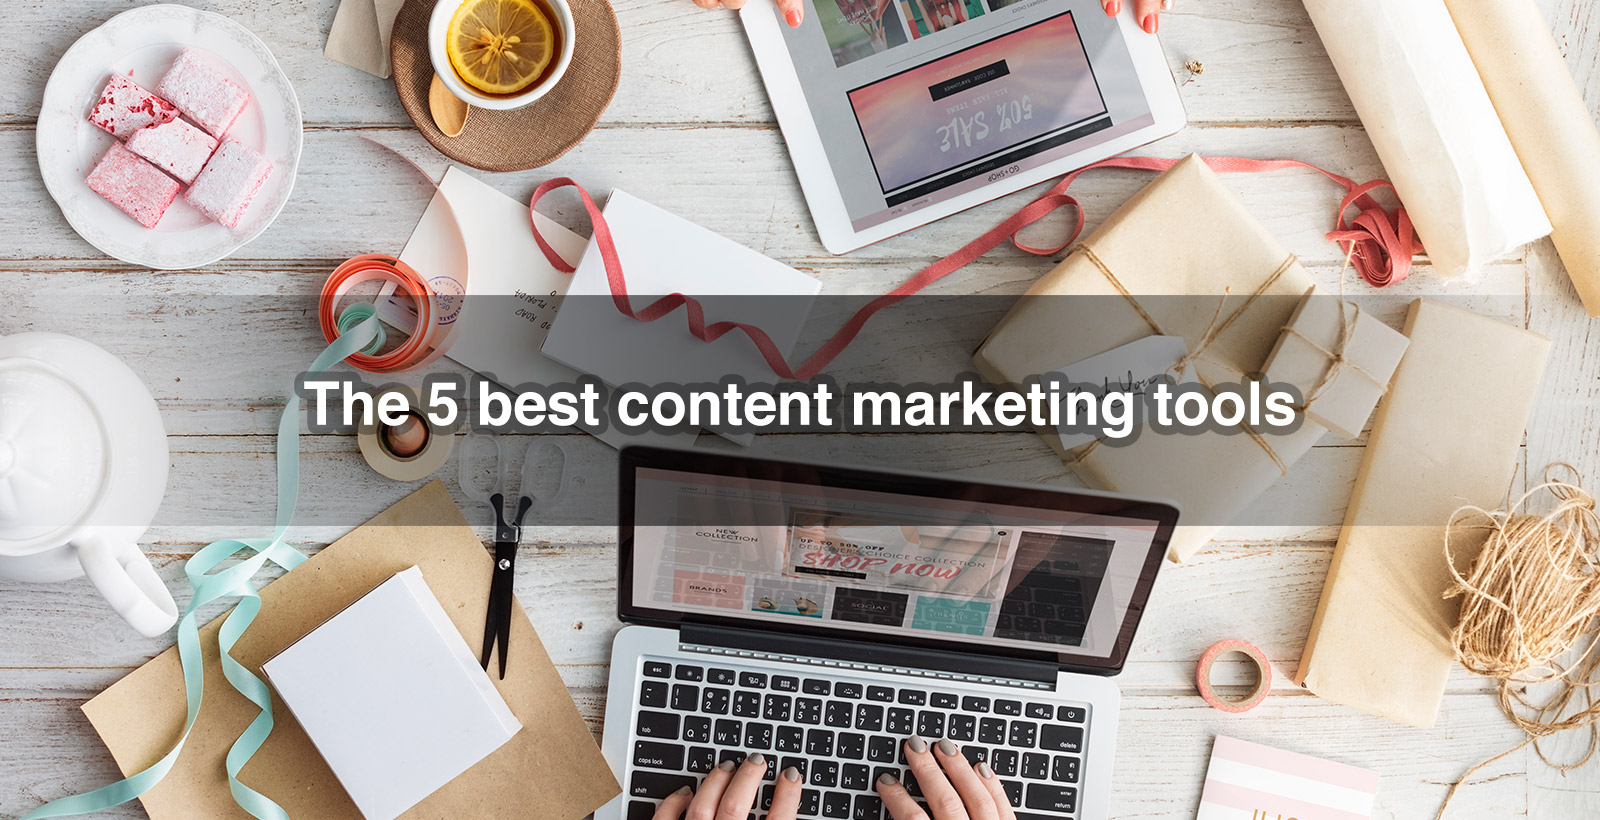 The 5 best content marketing tools